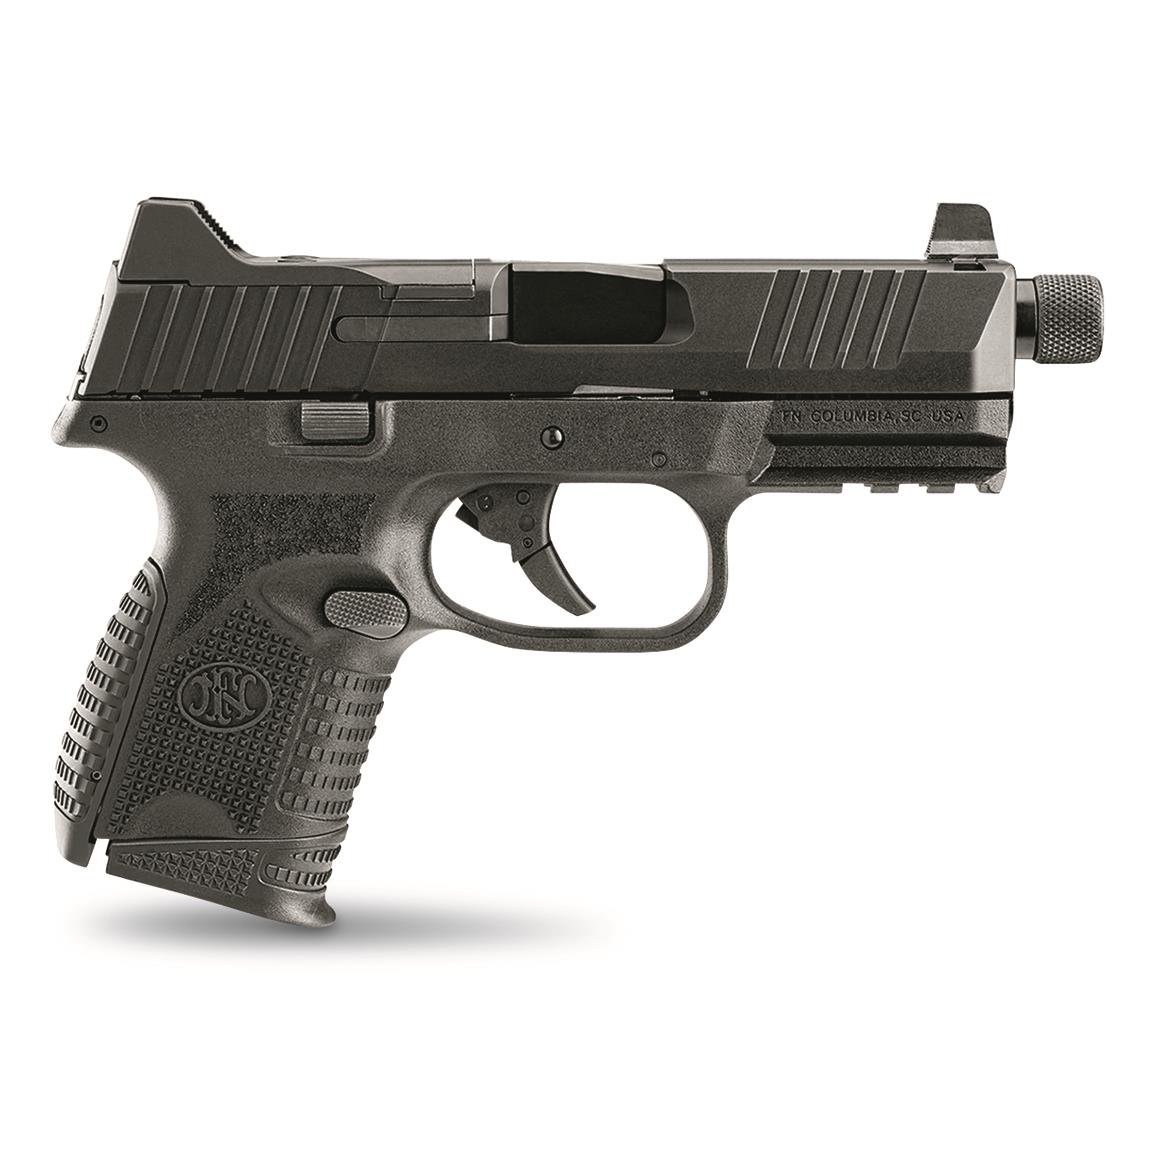 FN America FN 509 Compact Tactical, Semi-Automatic, 9mm, 4.32" Threaded Barrel, 24+1 Rds.